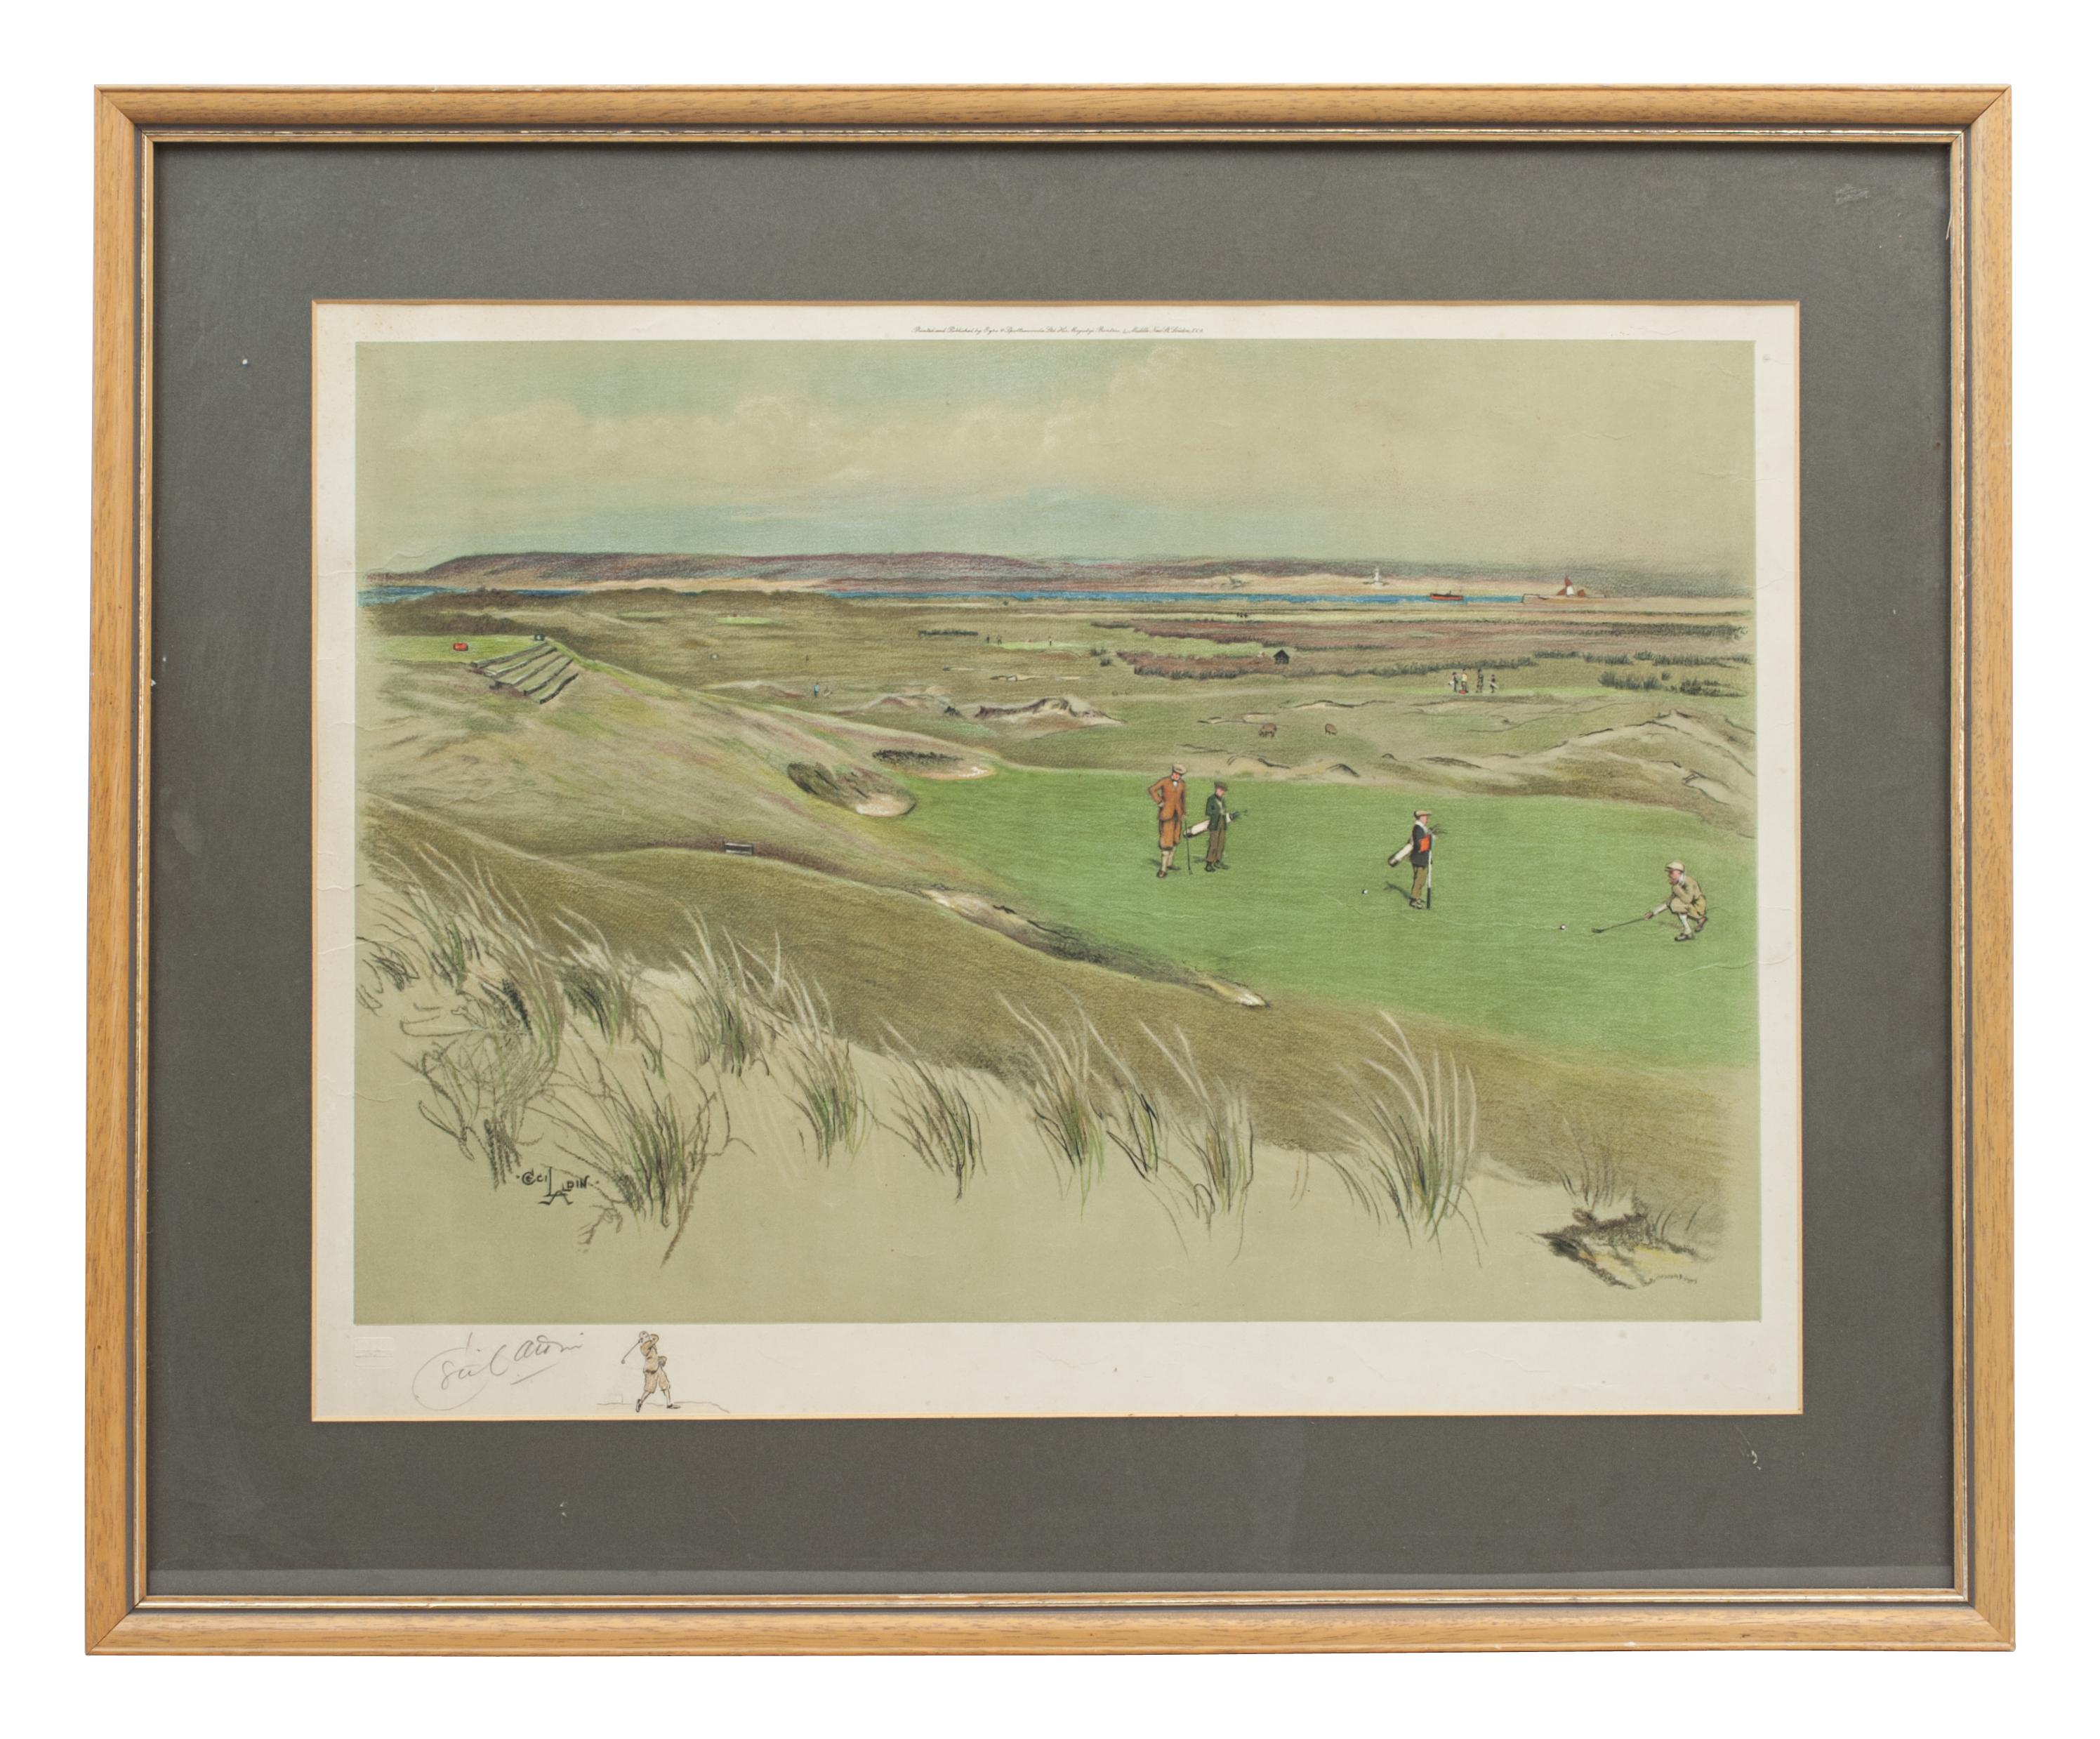 Cecil Aldin Golf print, Westward Ho!- The 6th green.
A mounted and framed golf photolithograph of Westward Ho! (Royal North Devon Golf Club) 6th Green. Signed in pencil by the artist with painted remarque of a golfer in full swing and with hand